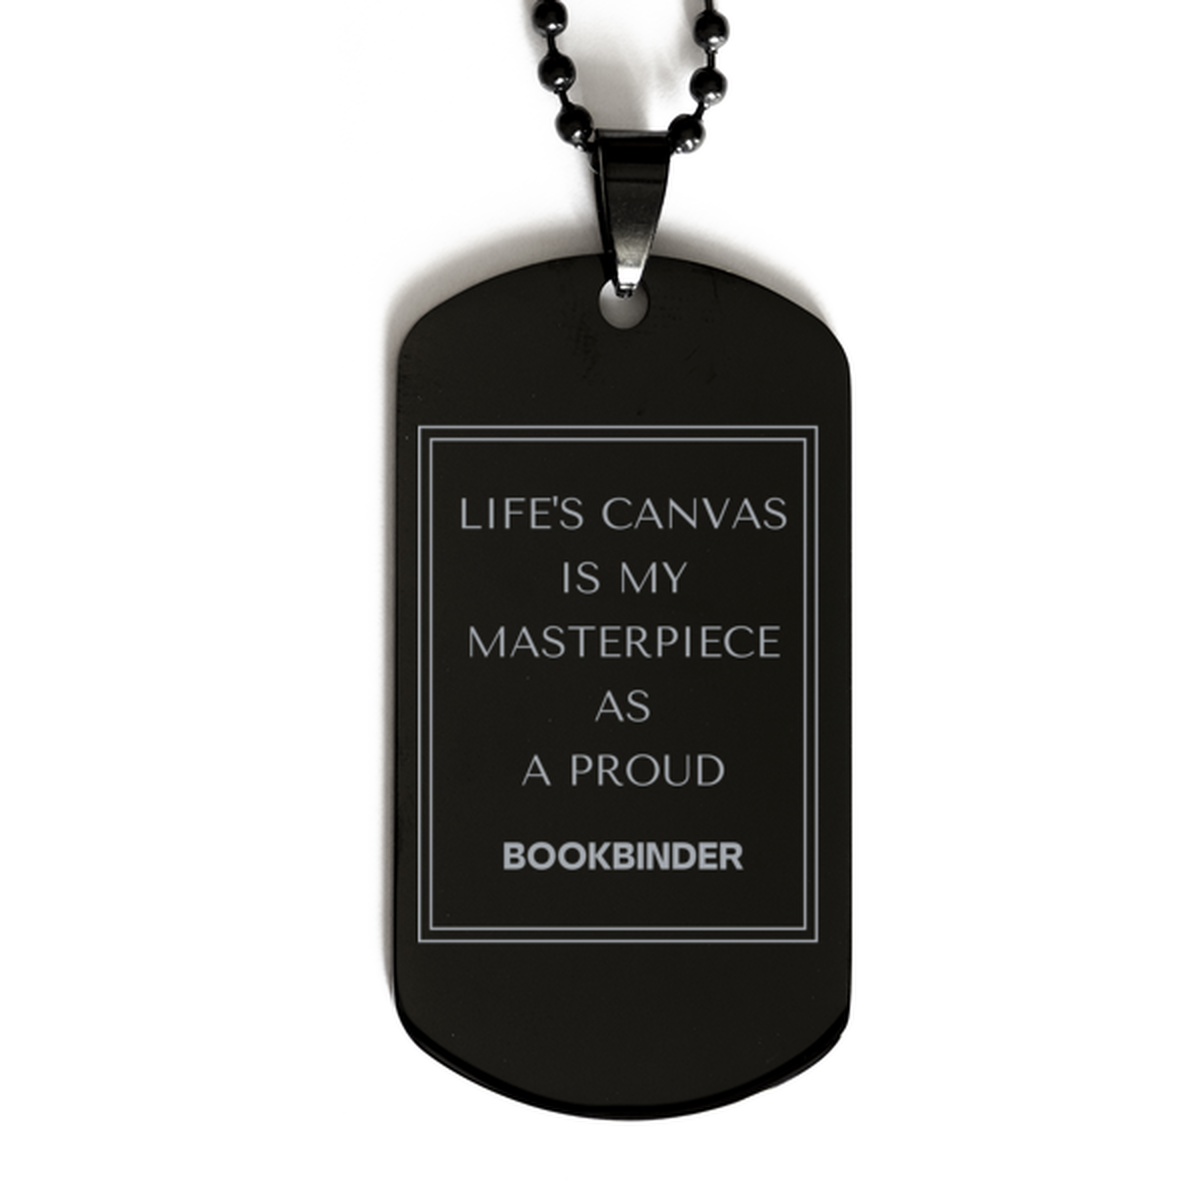 Proud Bookbinder Gifts, Life's canvas is my masterpiece, Epic Birthday Christmas Unique Black Dog Tag For Bookbinder, Coworkers, Men, Women, Friends